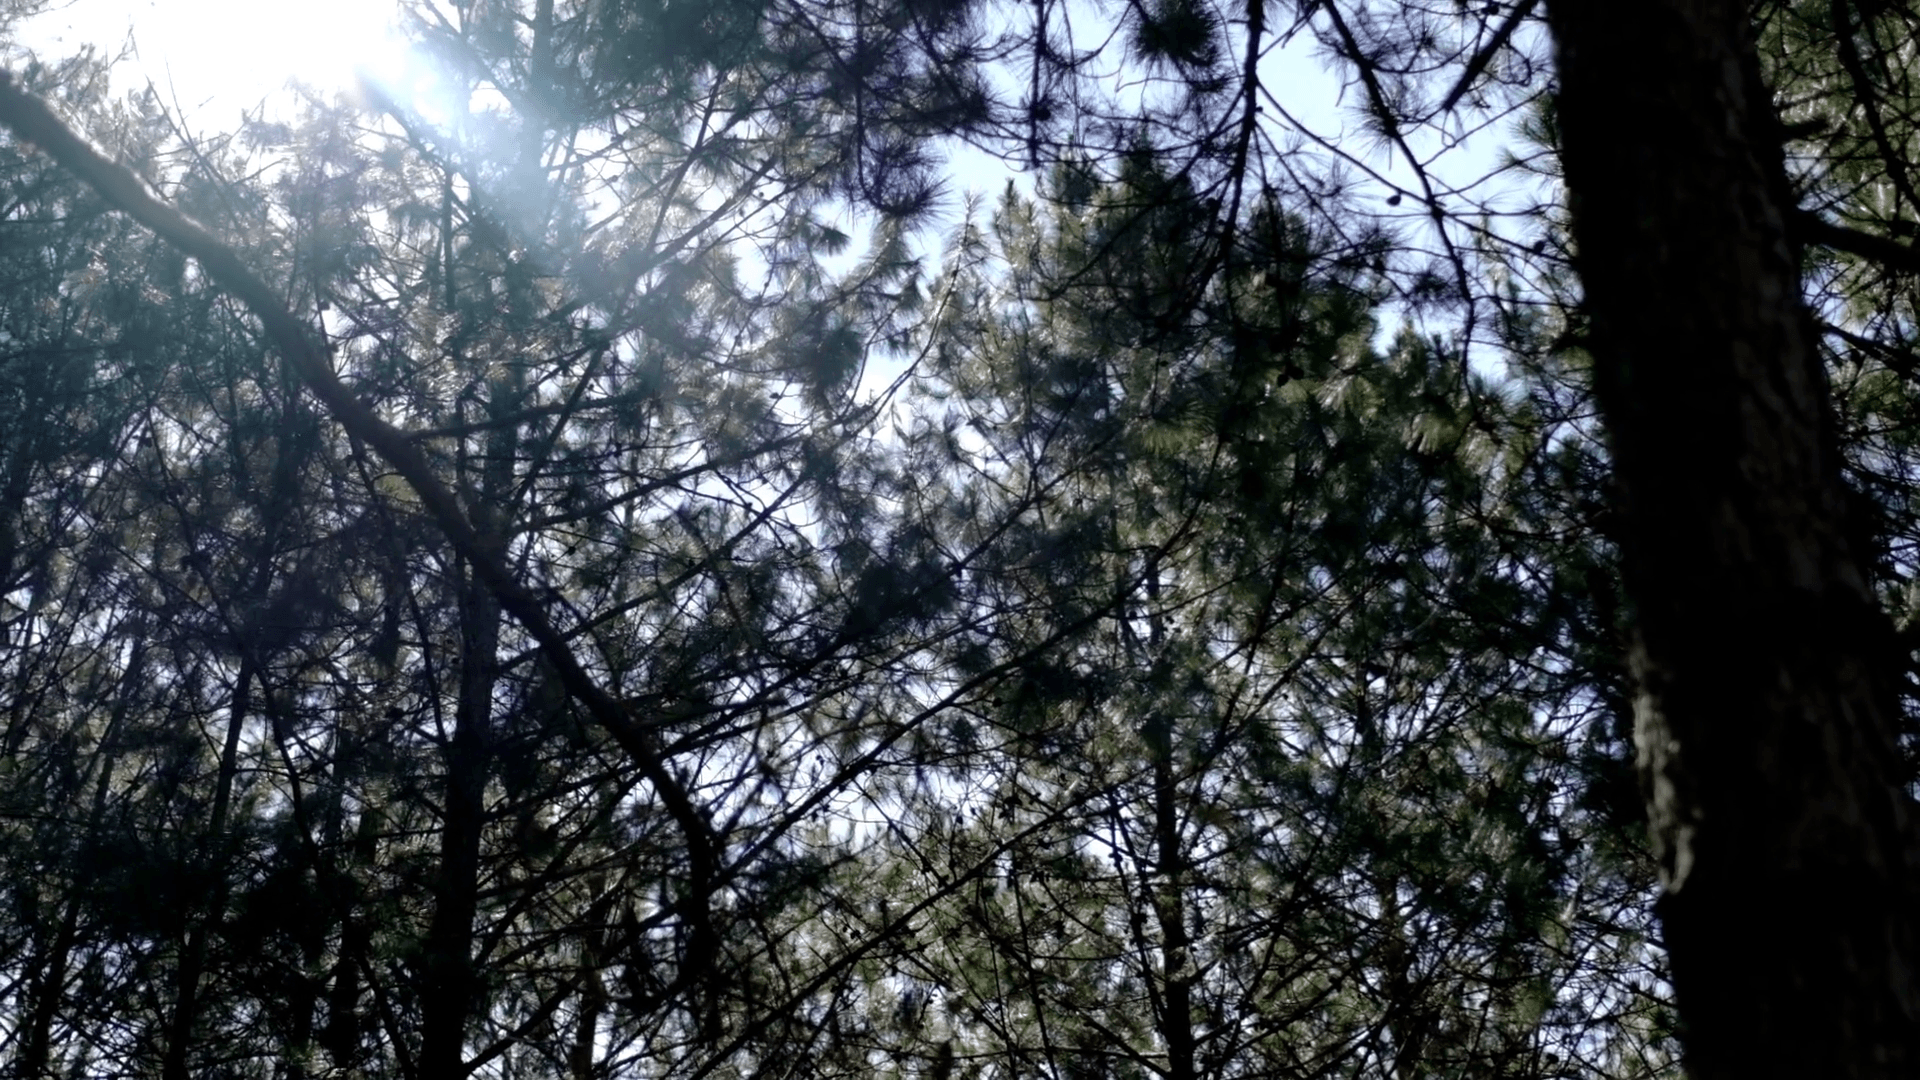 View Up Or Bottom View Of Pine Trees In Forest In Sunshine. Royalty High Quality Free Stock Video Footage Looking Up In Pine Forest Tree To Canopy